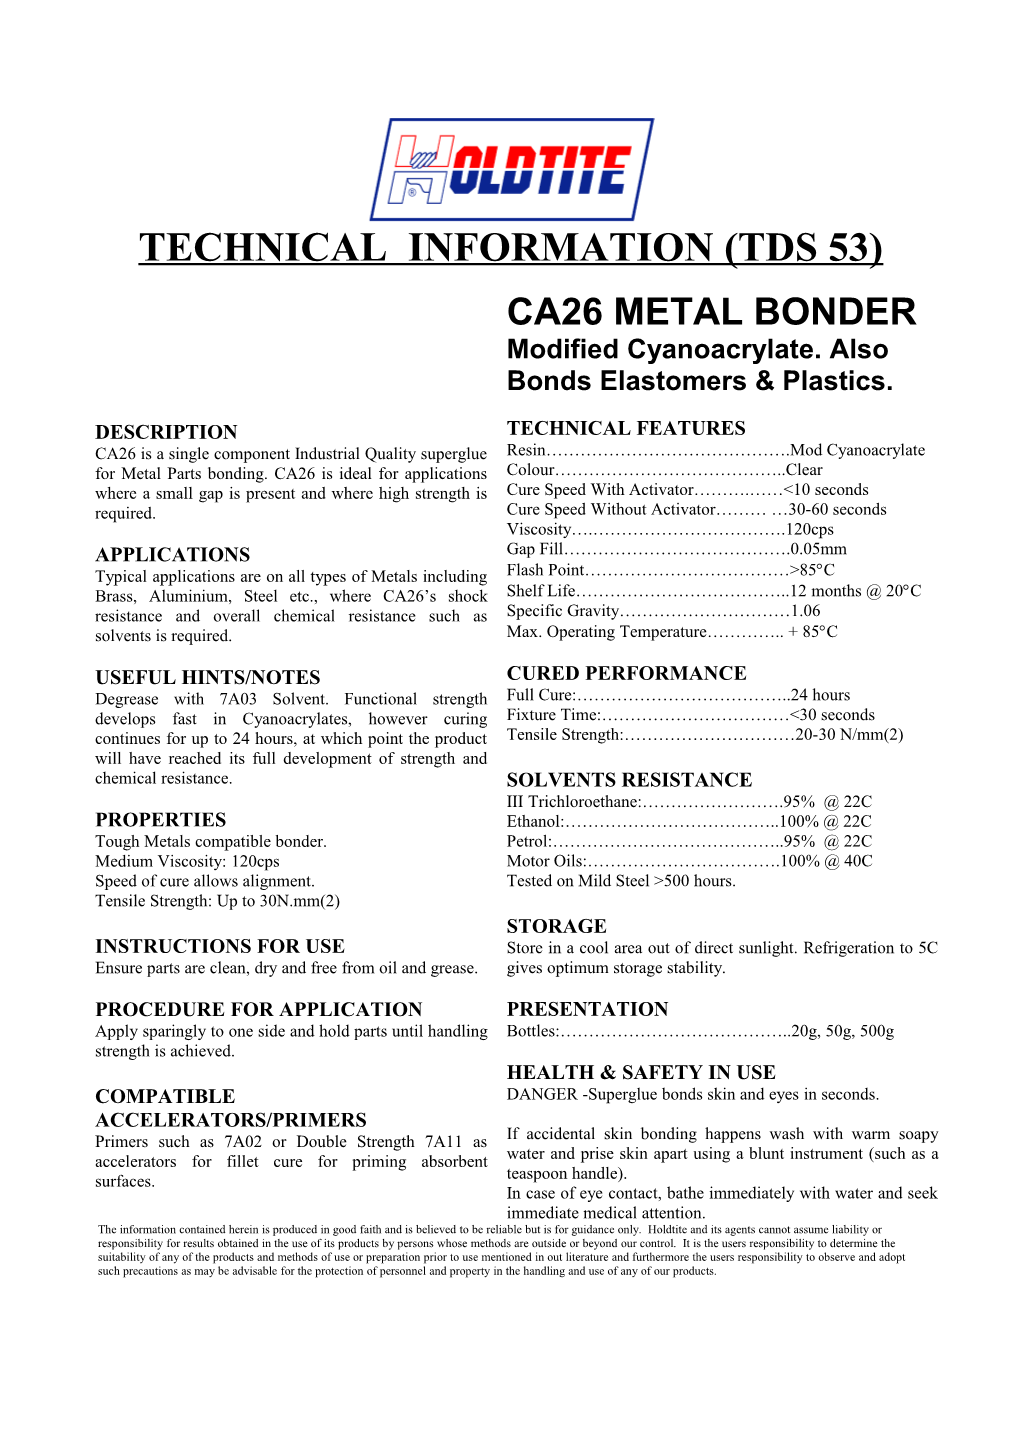 Technical Information (Tds 53)